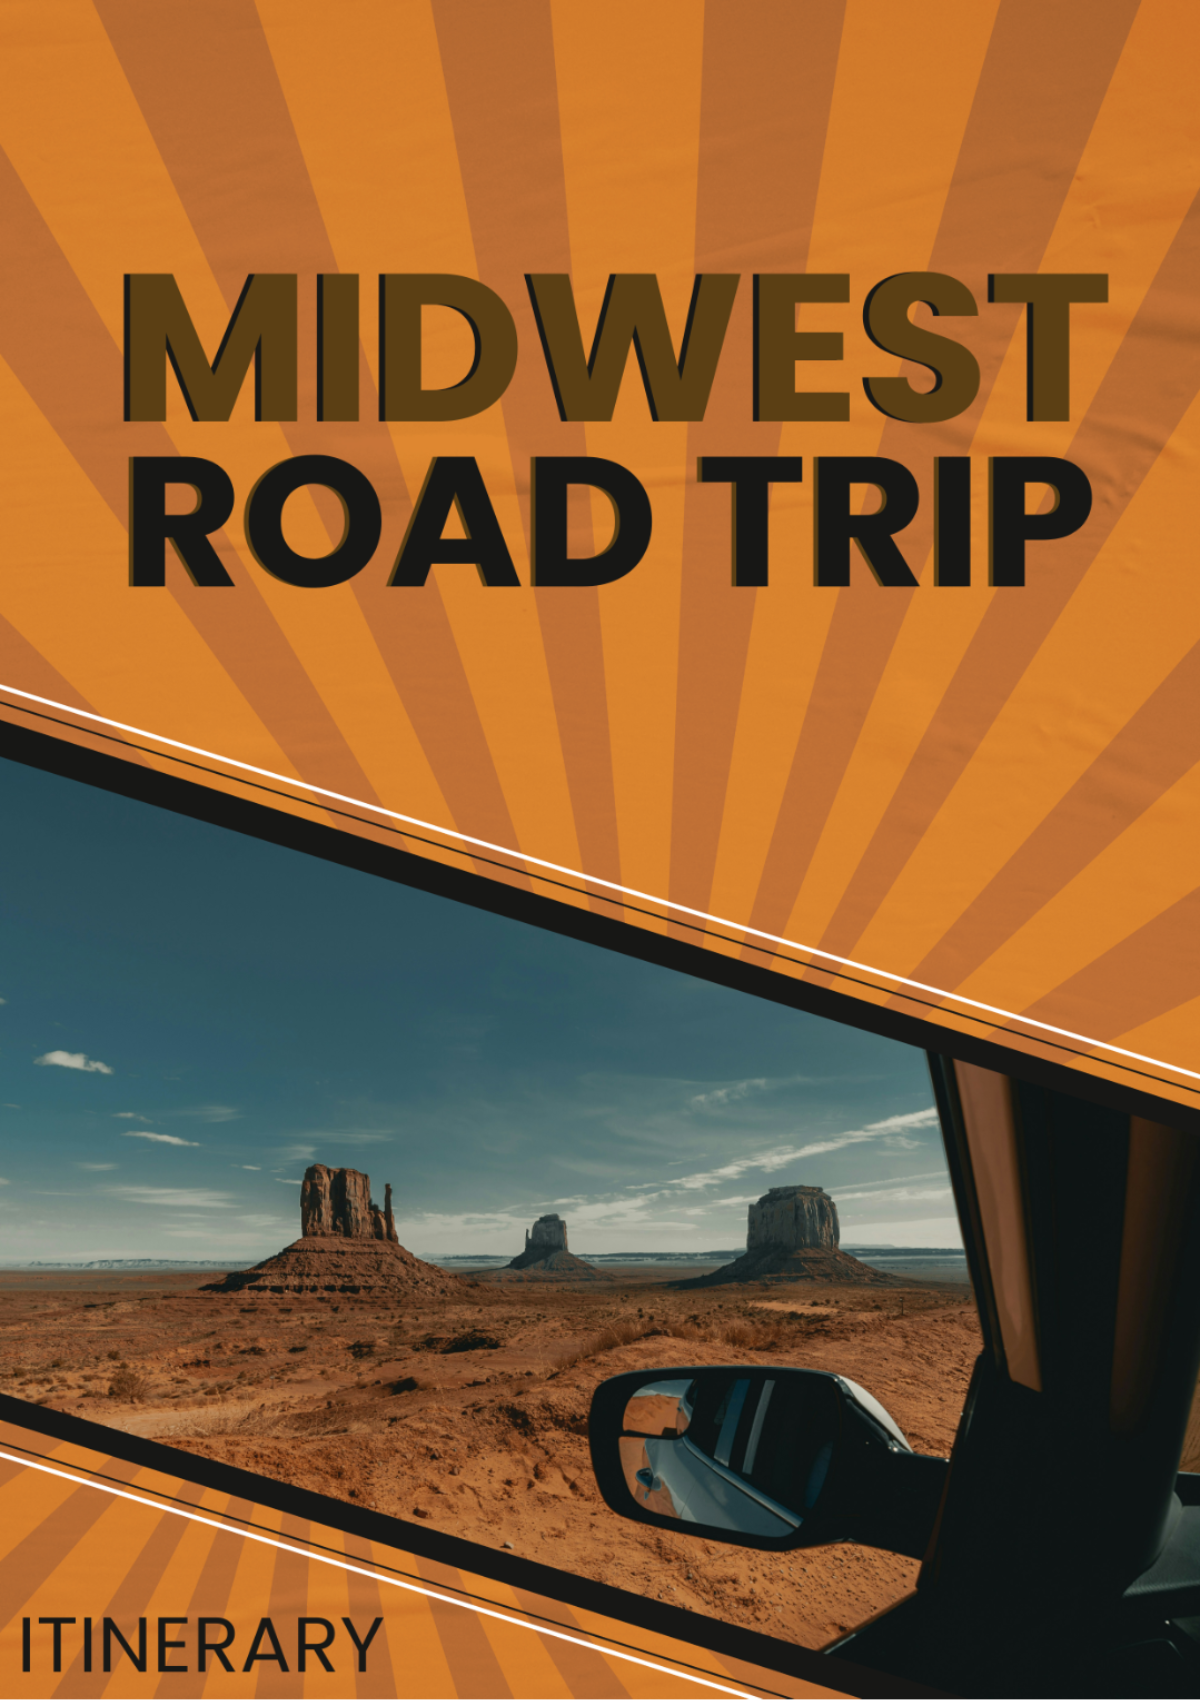 Midwest Road Trip Itinerary Template